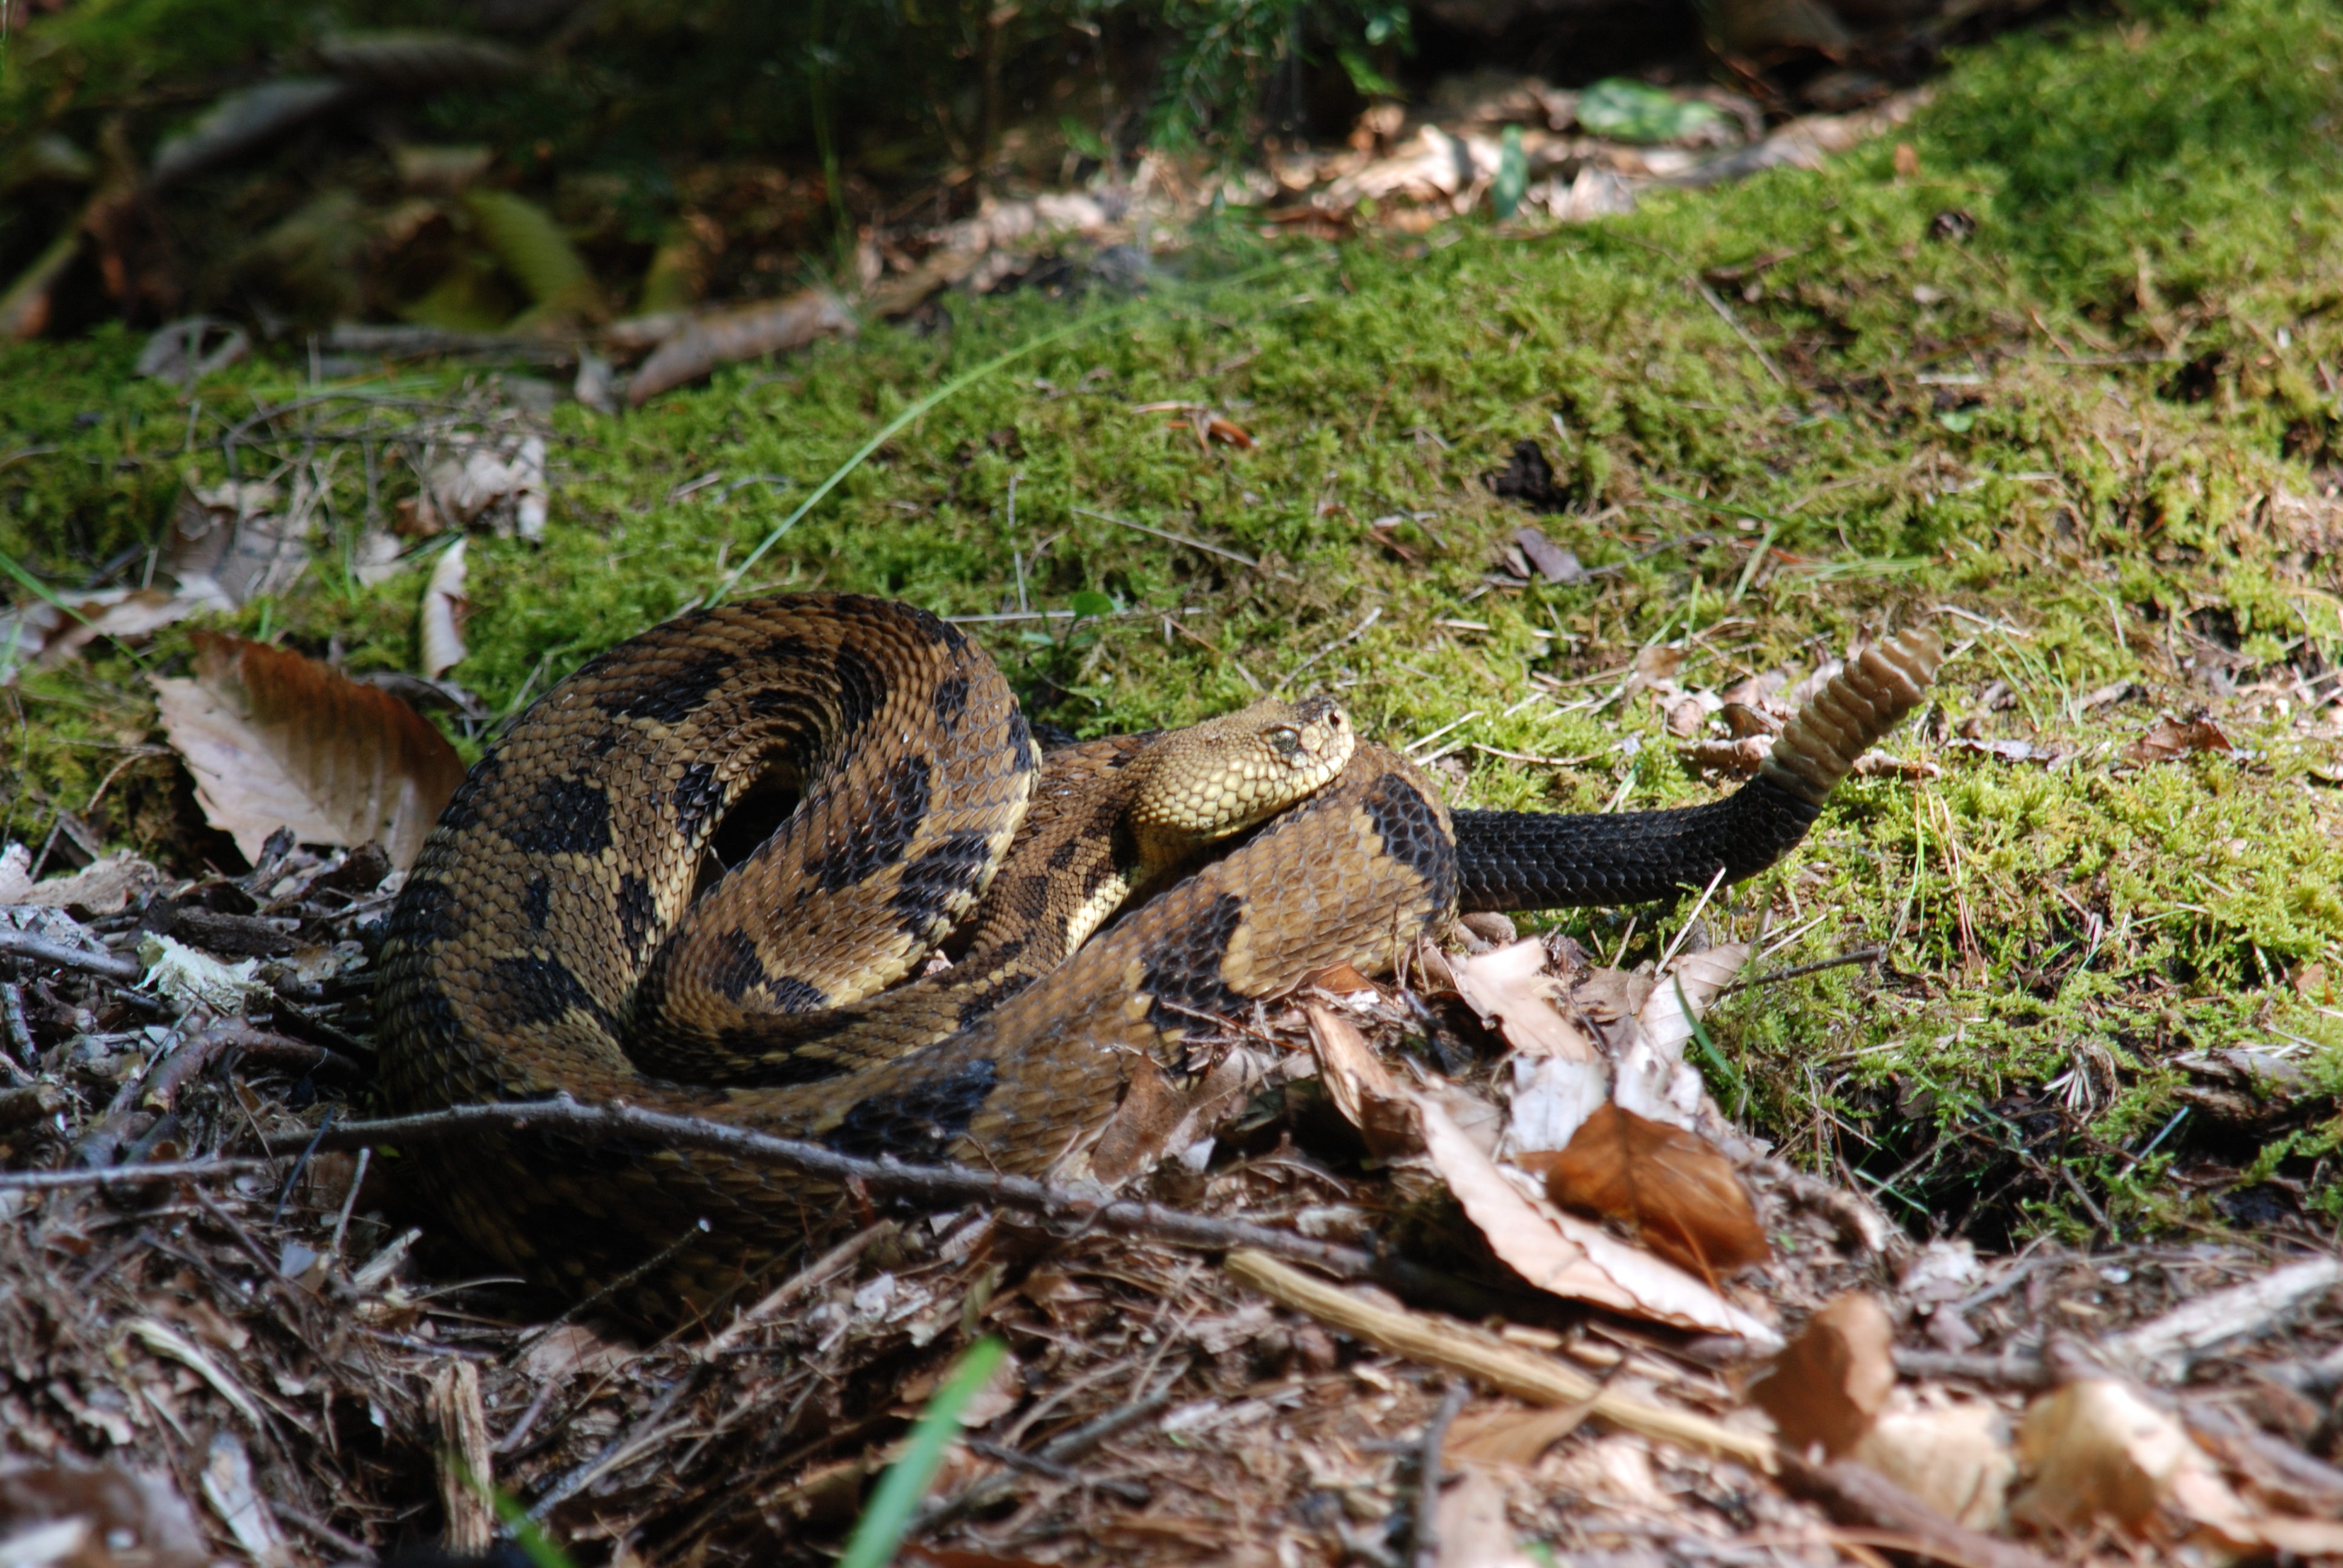 How Long Does a Timber Rattlesnake Live?